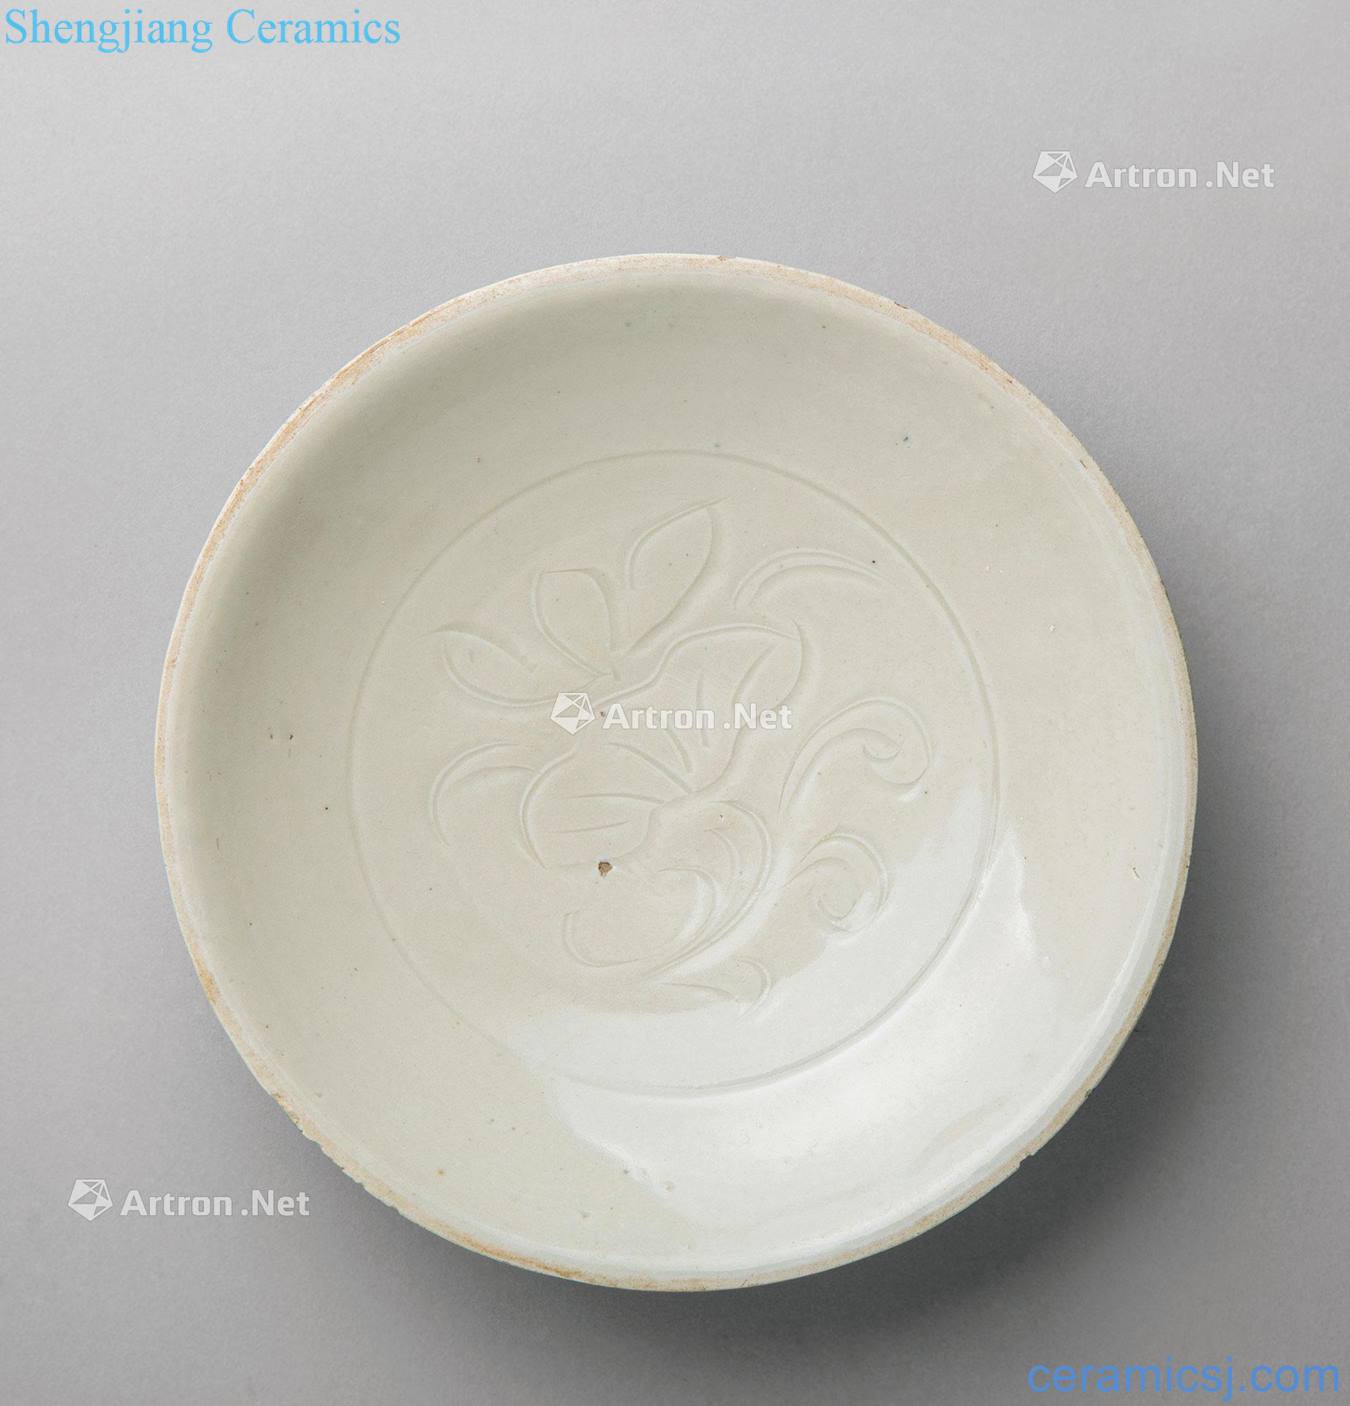 The song dynasty kiln dark carved flower tray